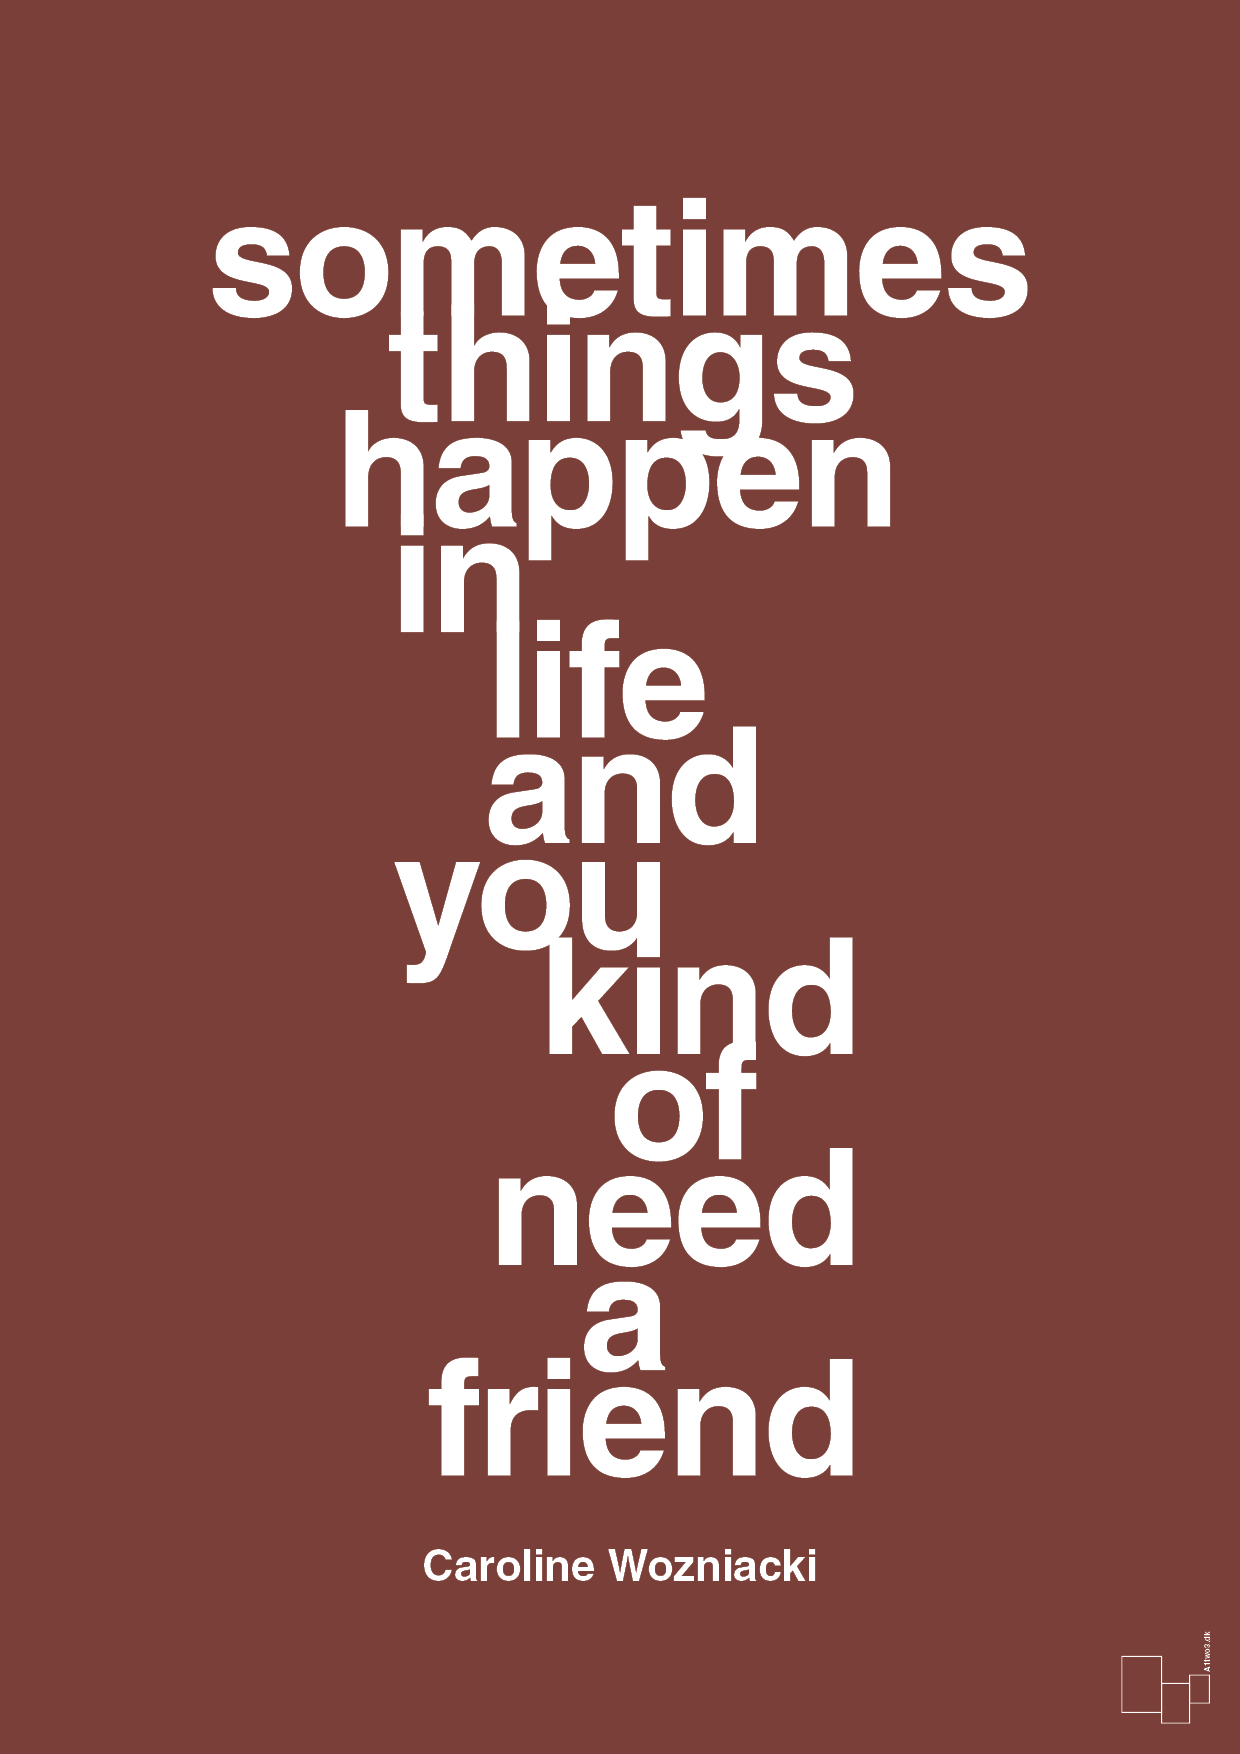 sometimes things happen in life and you kind of need a friend - Plakat med Citater i Red Pepper